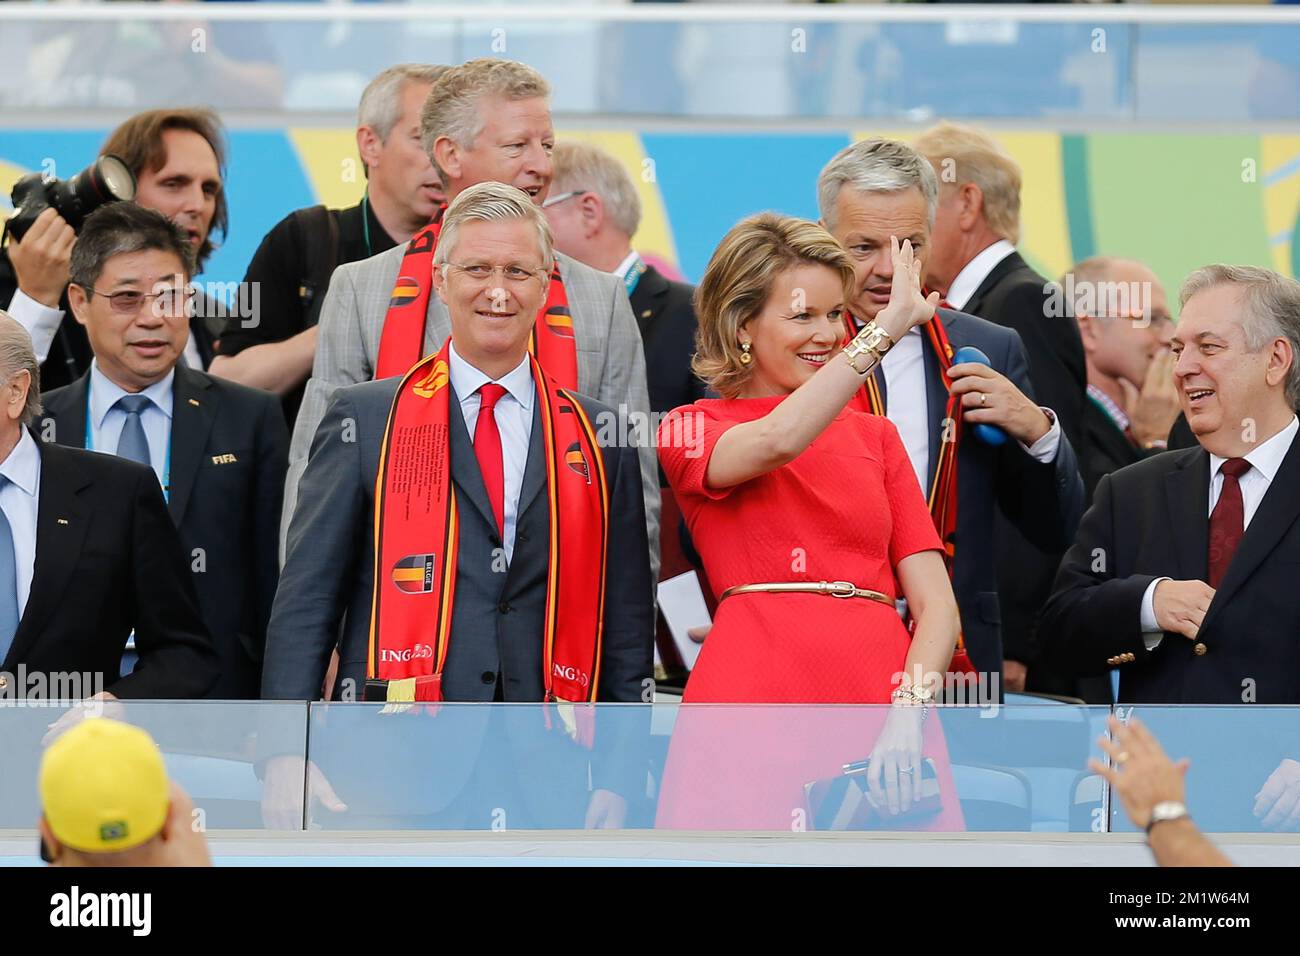 20140622 - RIO DE JANEIRO, BRAZIL: King Philippe - Filip of Belgium, Queen Mathilde of Belgium, Outgoing Vice-Minister and Defence Minister Pieter De Crem and Outgoing Vice-Prime Minister and Foreign Minister Didier Reynders pictured during a soccer game between Belgian national team The Red Devils and Russia in Rio de Janeiro, Brazil, the second game in Group H of the first round of the 2014 FIFA World Cup, Sunday 22 June 2014. BELGA PHOTO BRUNO FAHY Stock Photo